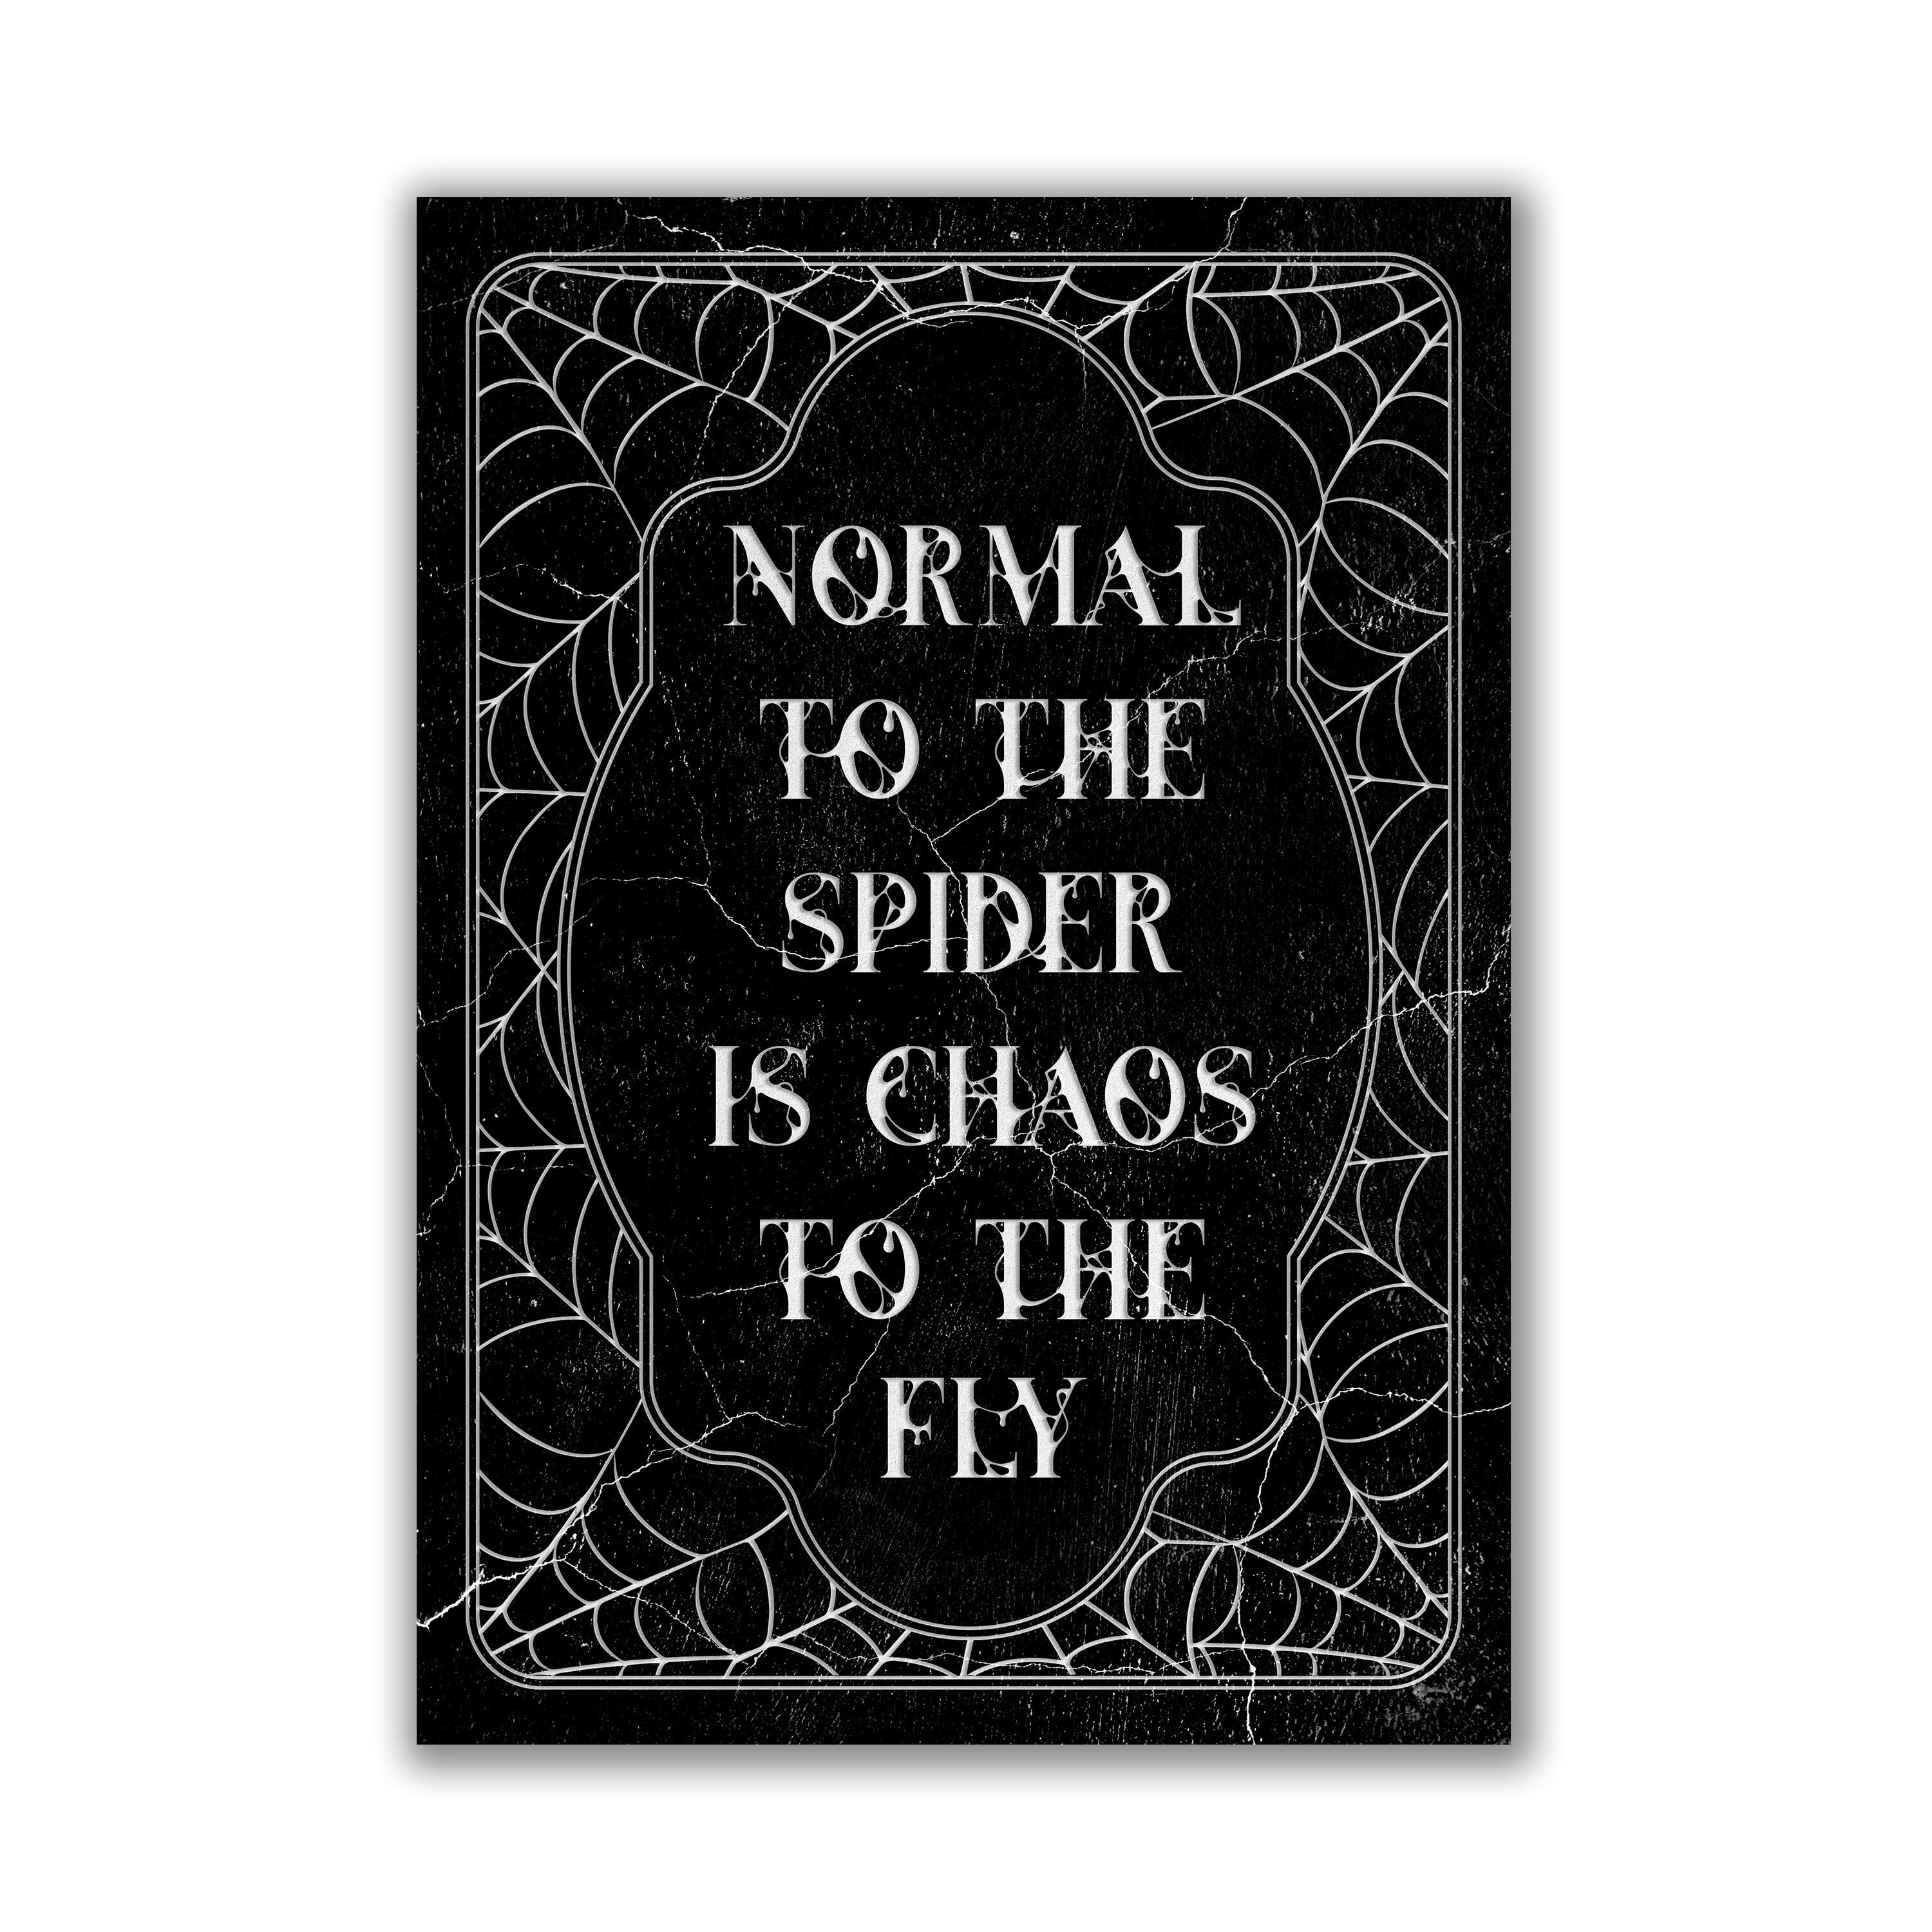 Normal To The Spider is Chaos To The Fly Print by The Blackened Teeth 